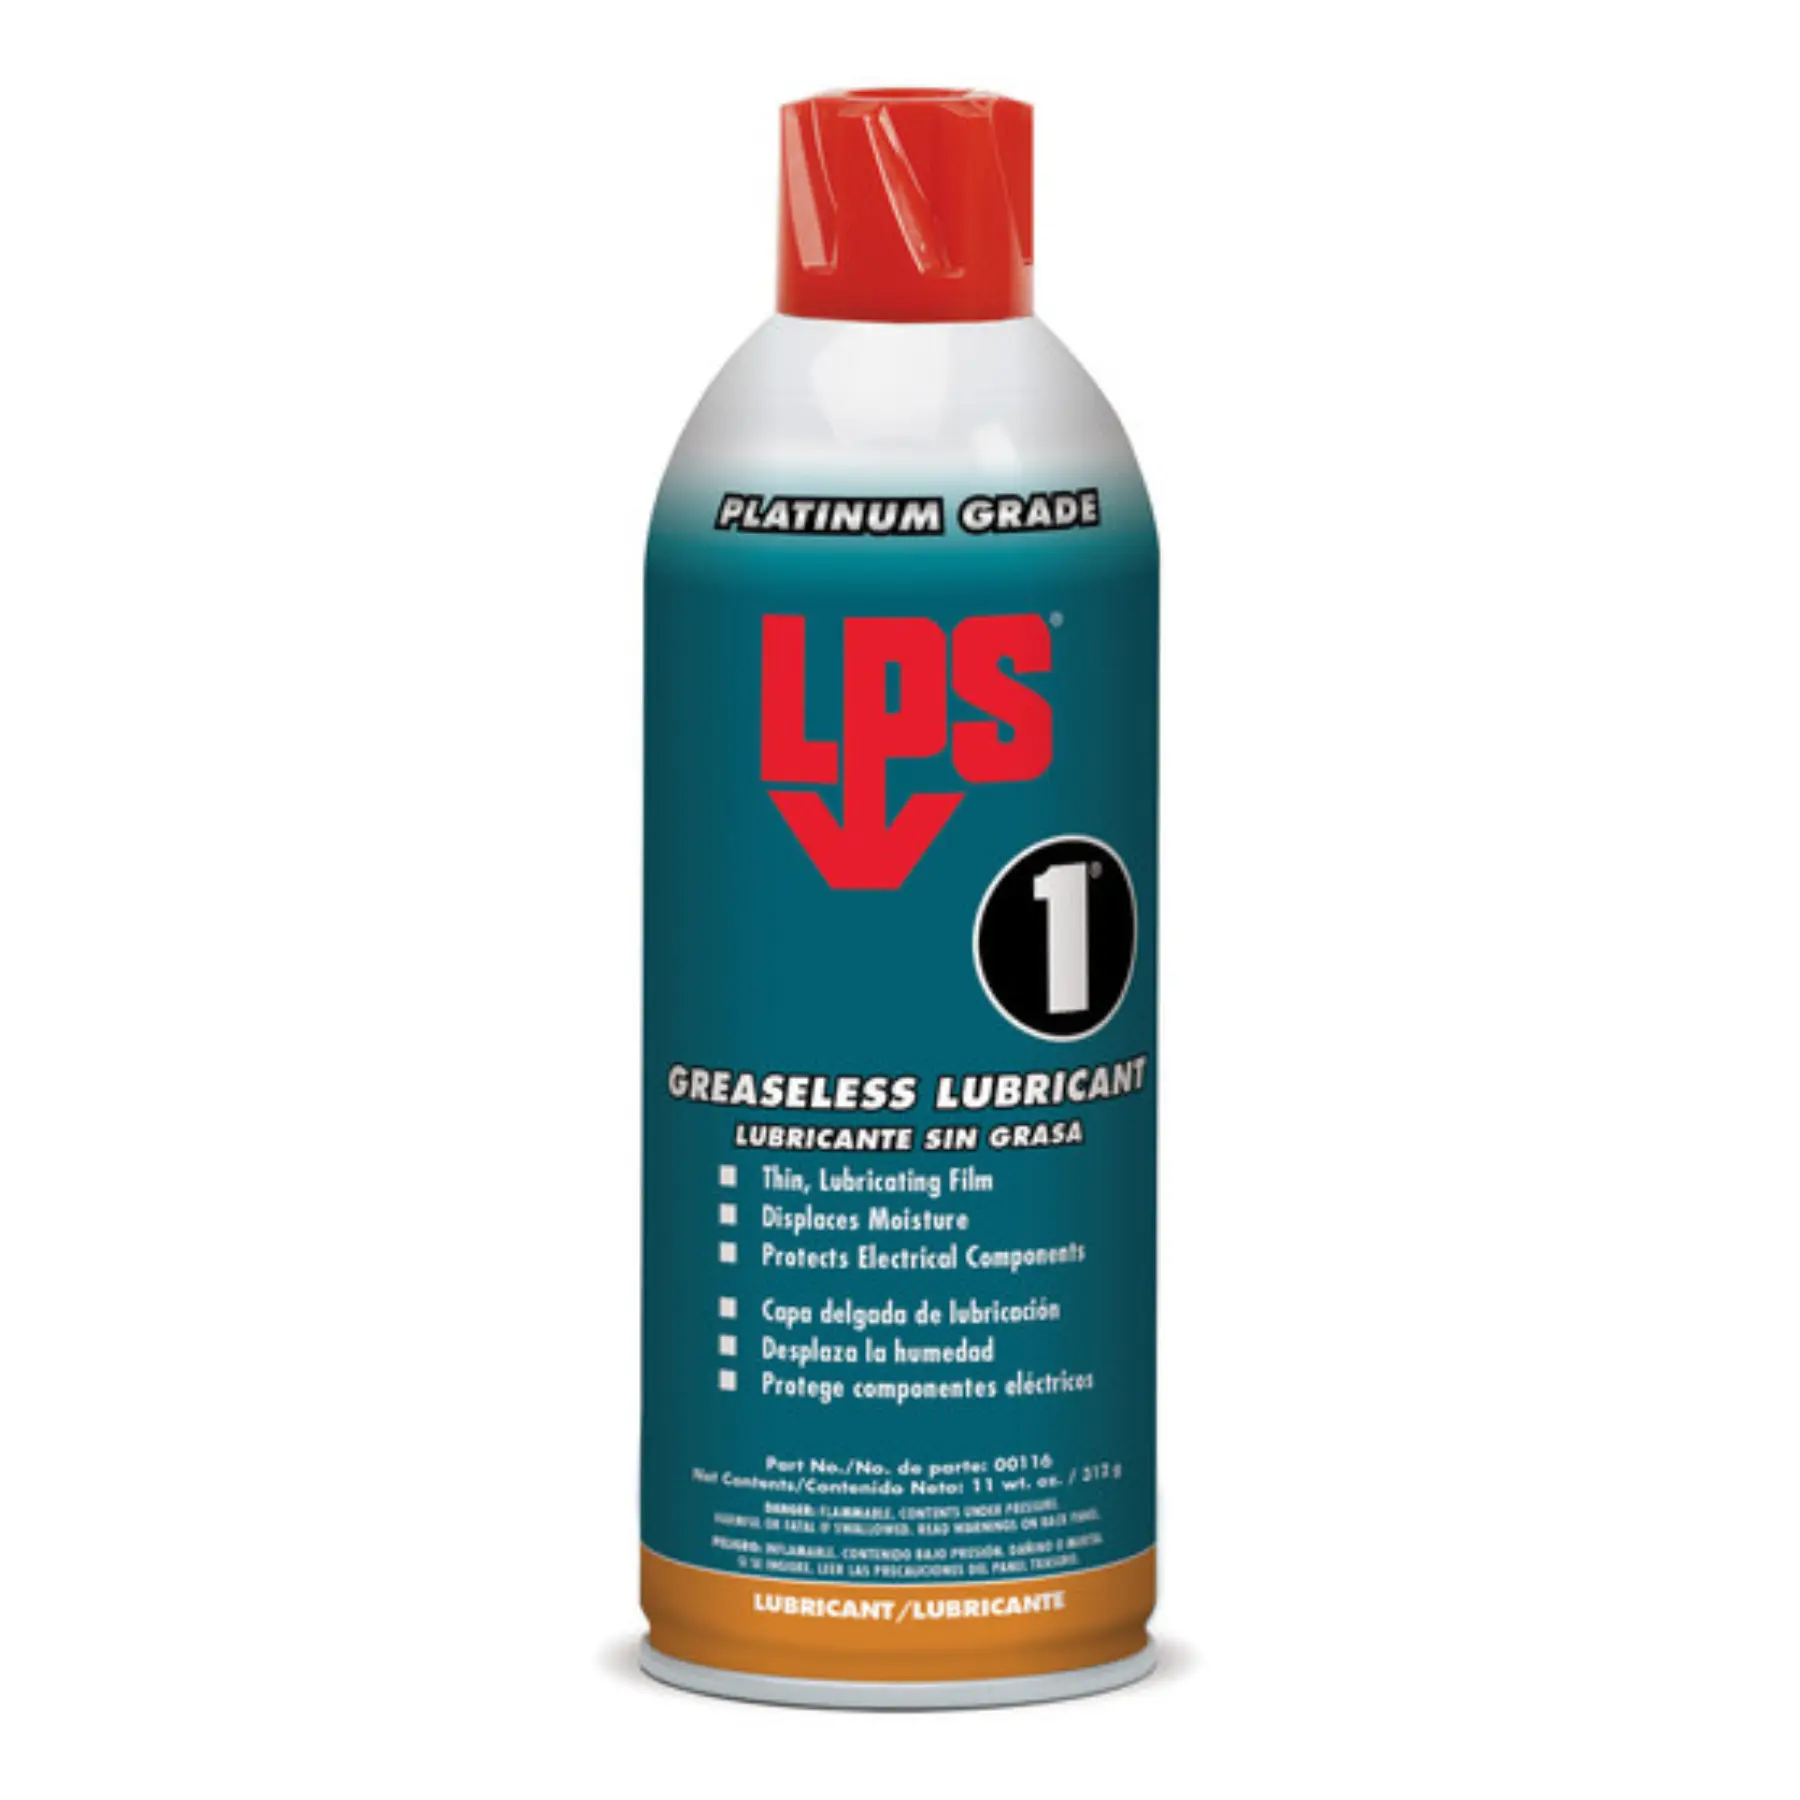 LPS 1 GREASELESS LUBRICANT 00116